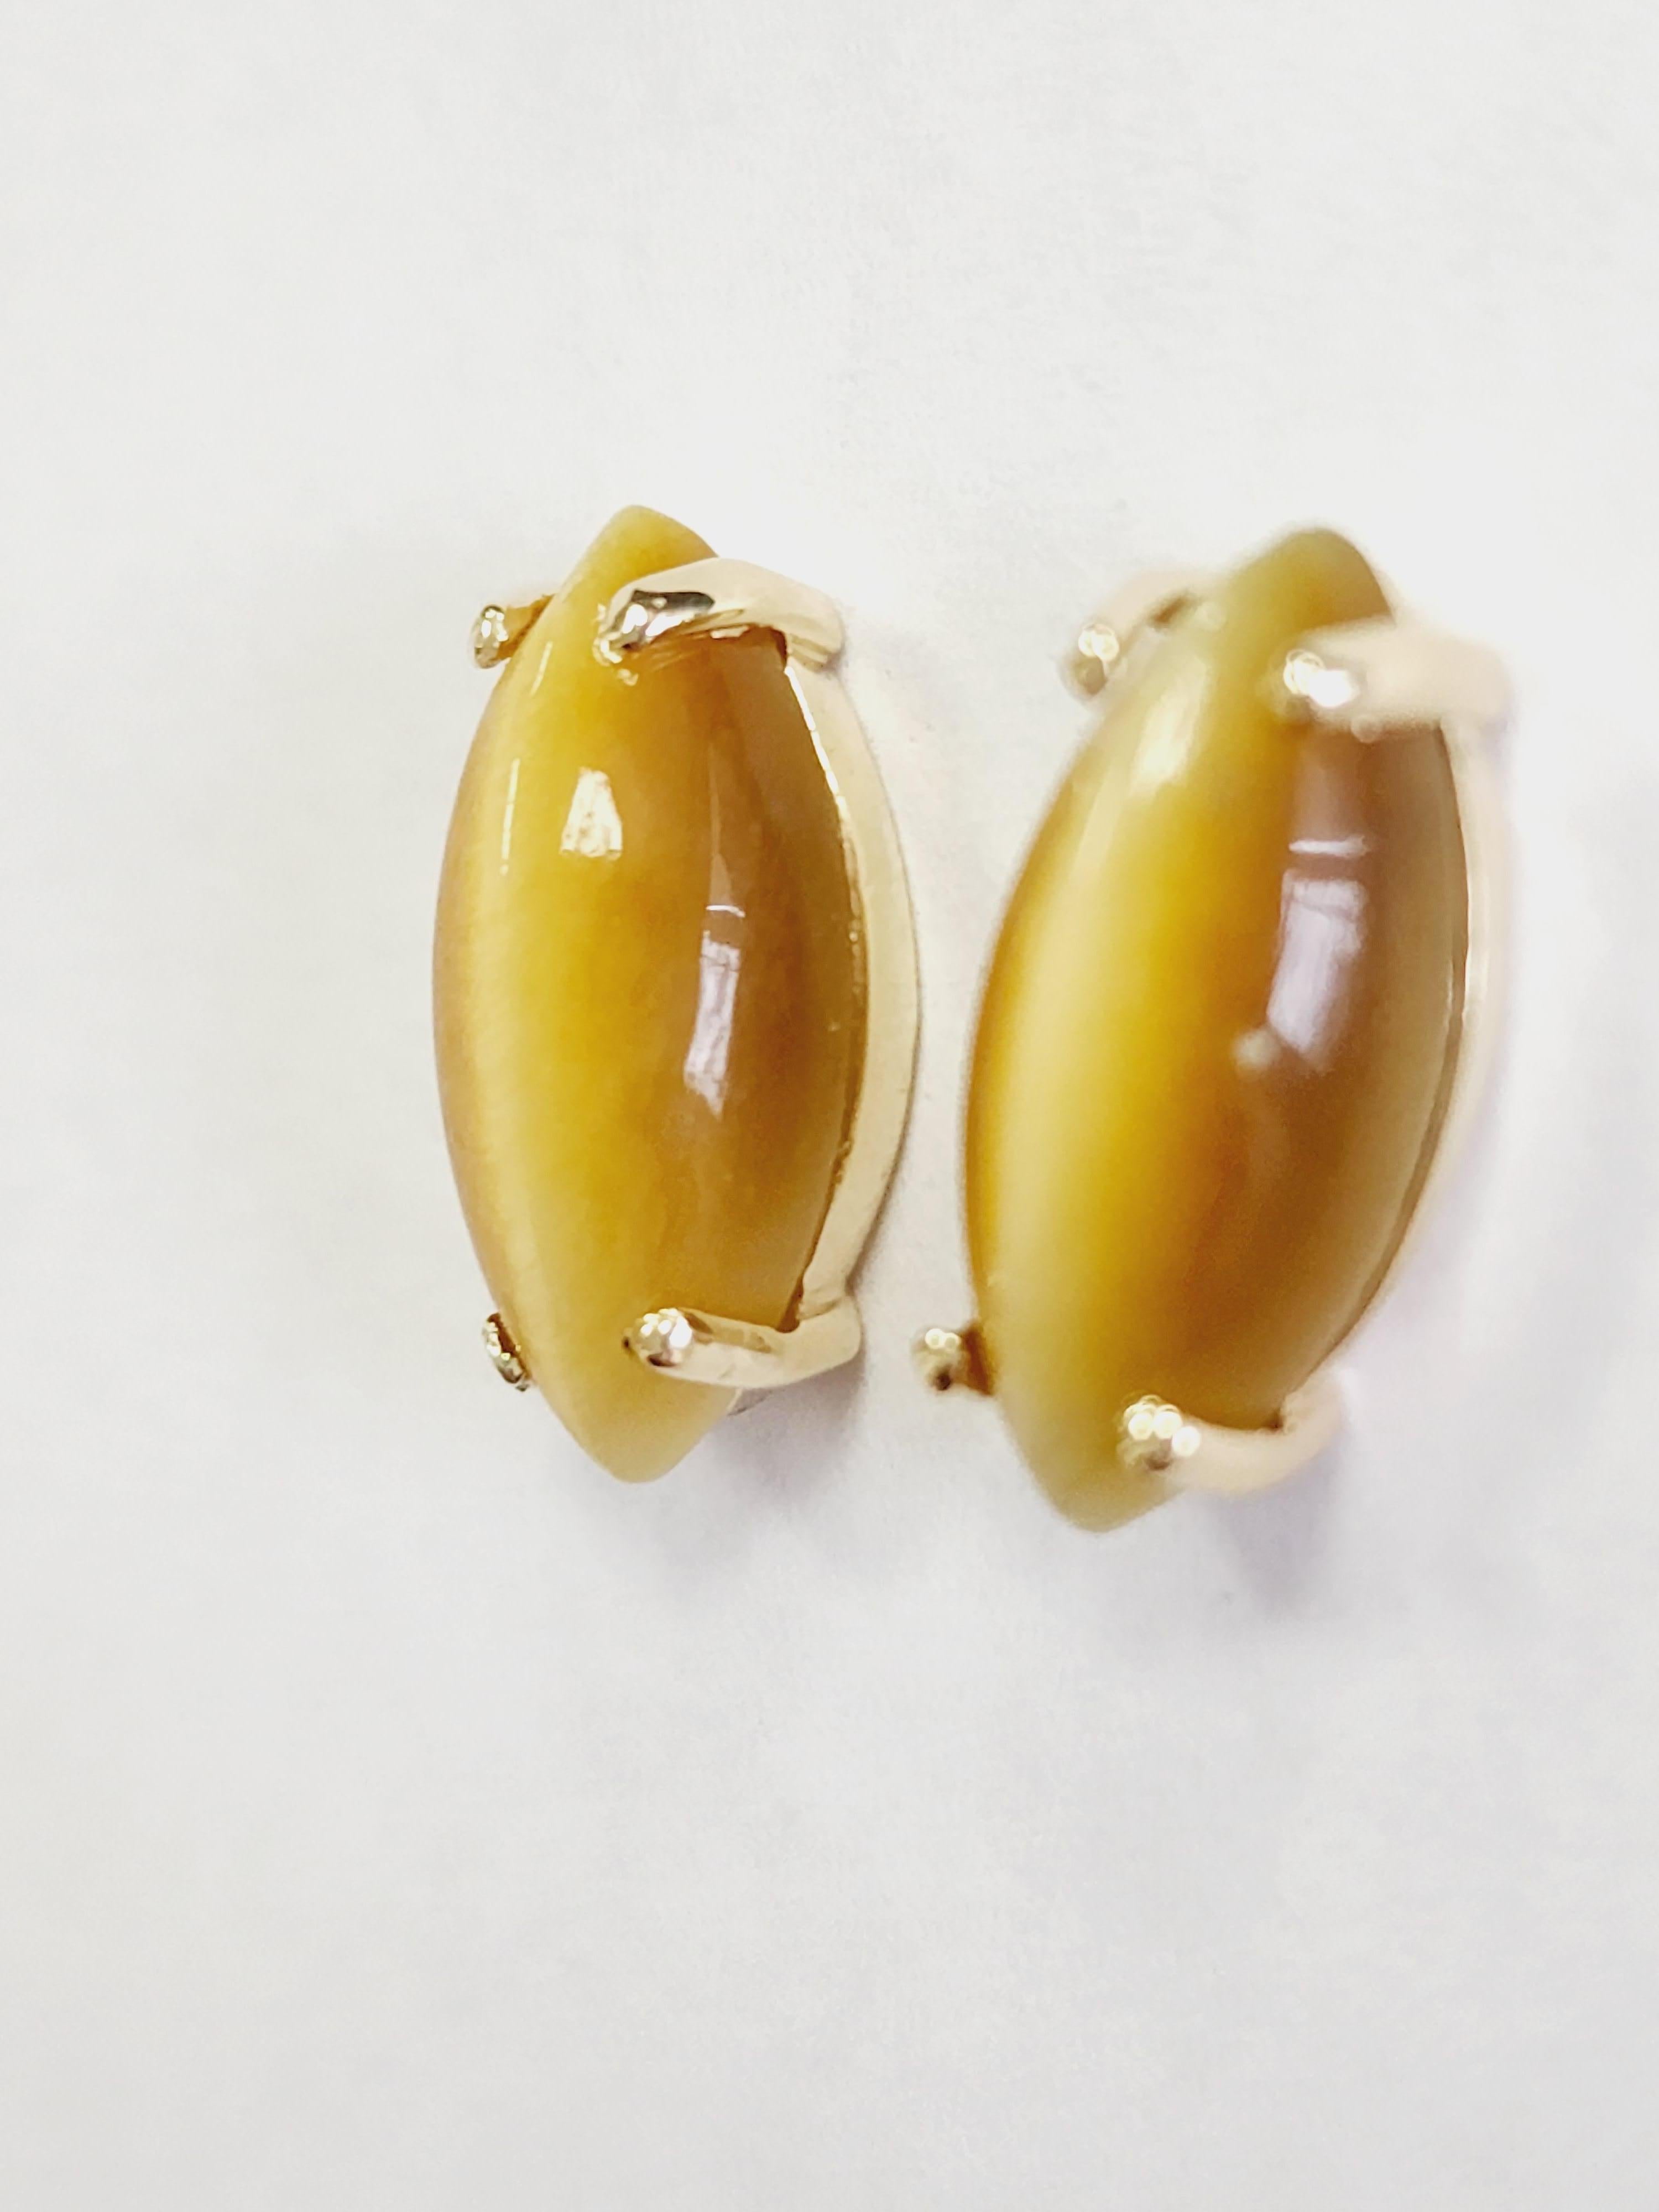 5.70 Carat Marquise Shape Cat's eye 14 Karat Yellow Gold Studs Earrings In Excellent Condition For Sale In Great Neck, NY